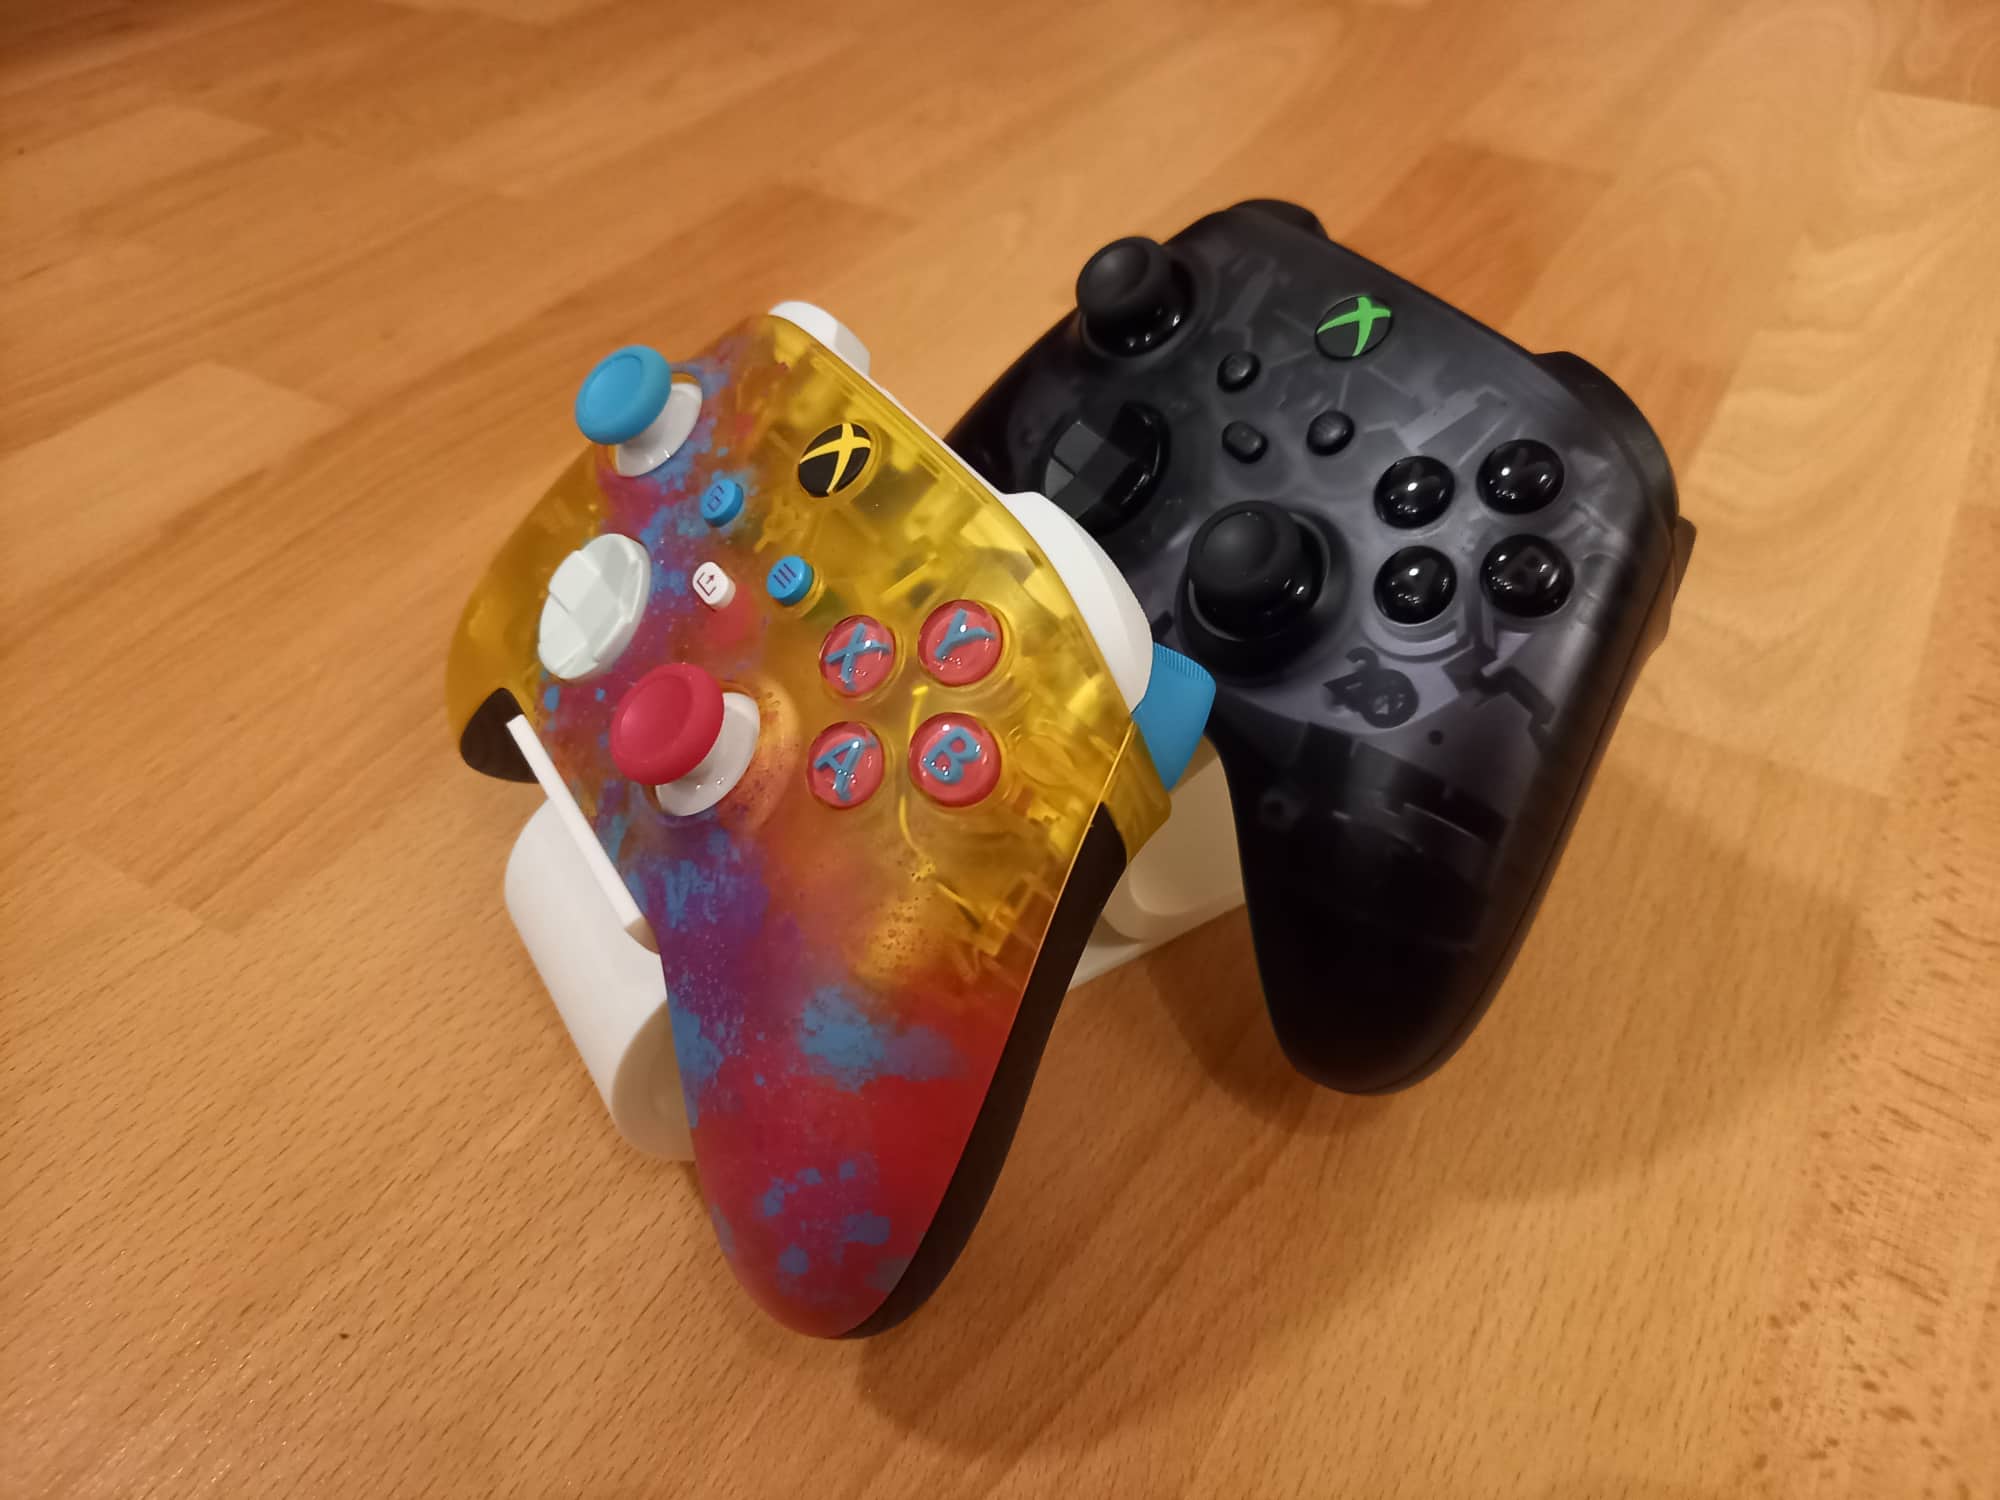 Dual Xbox controller holder / stand